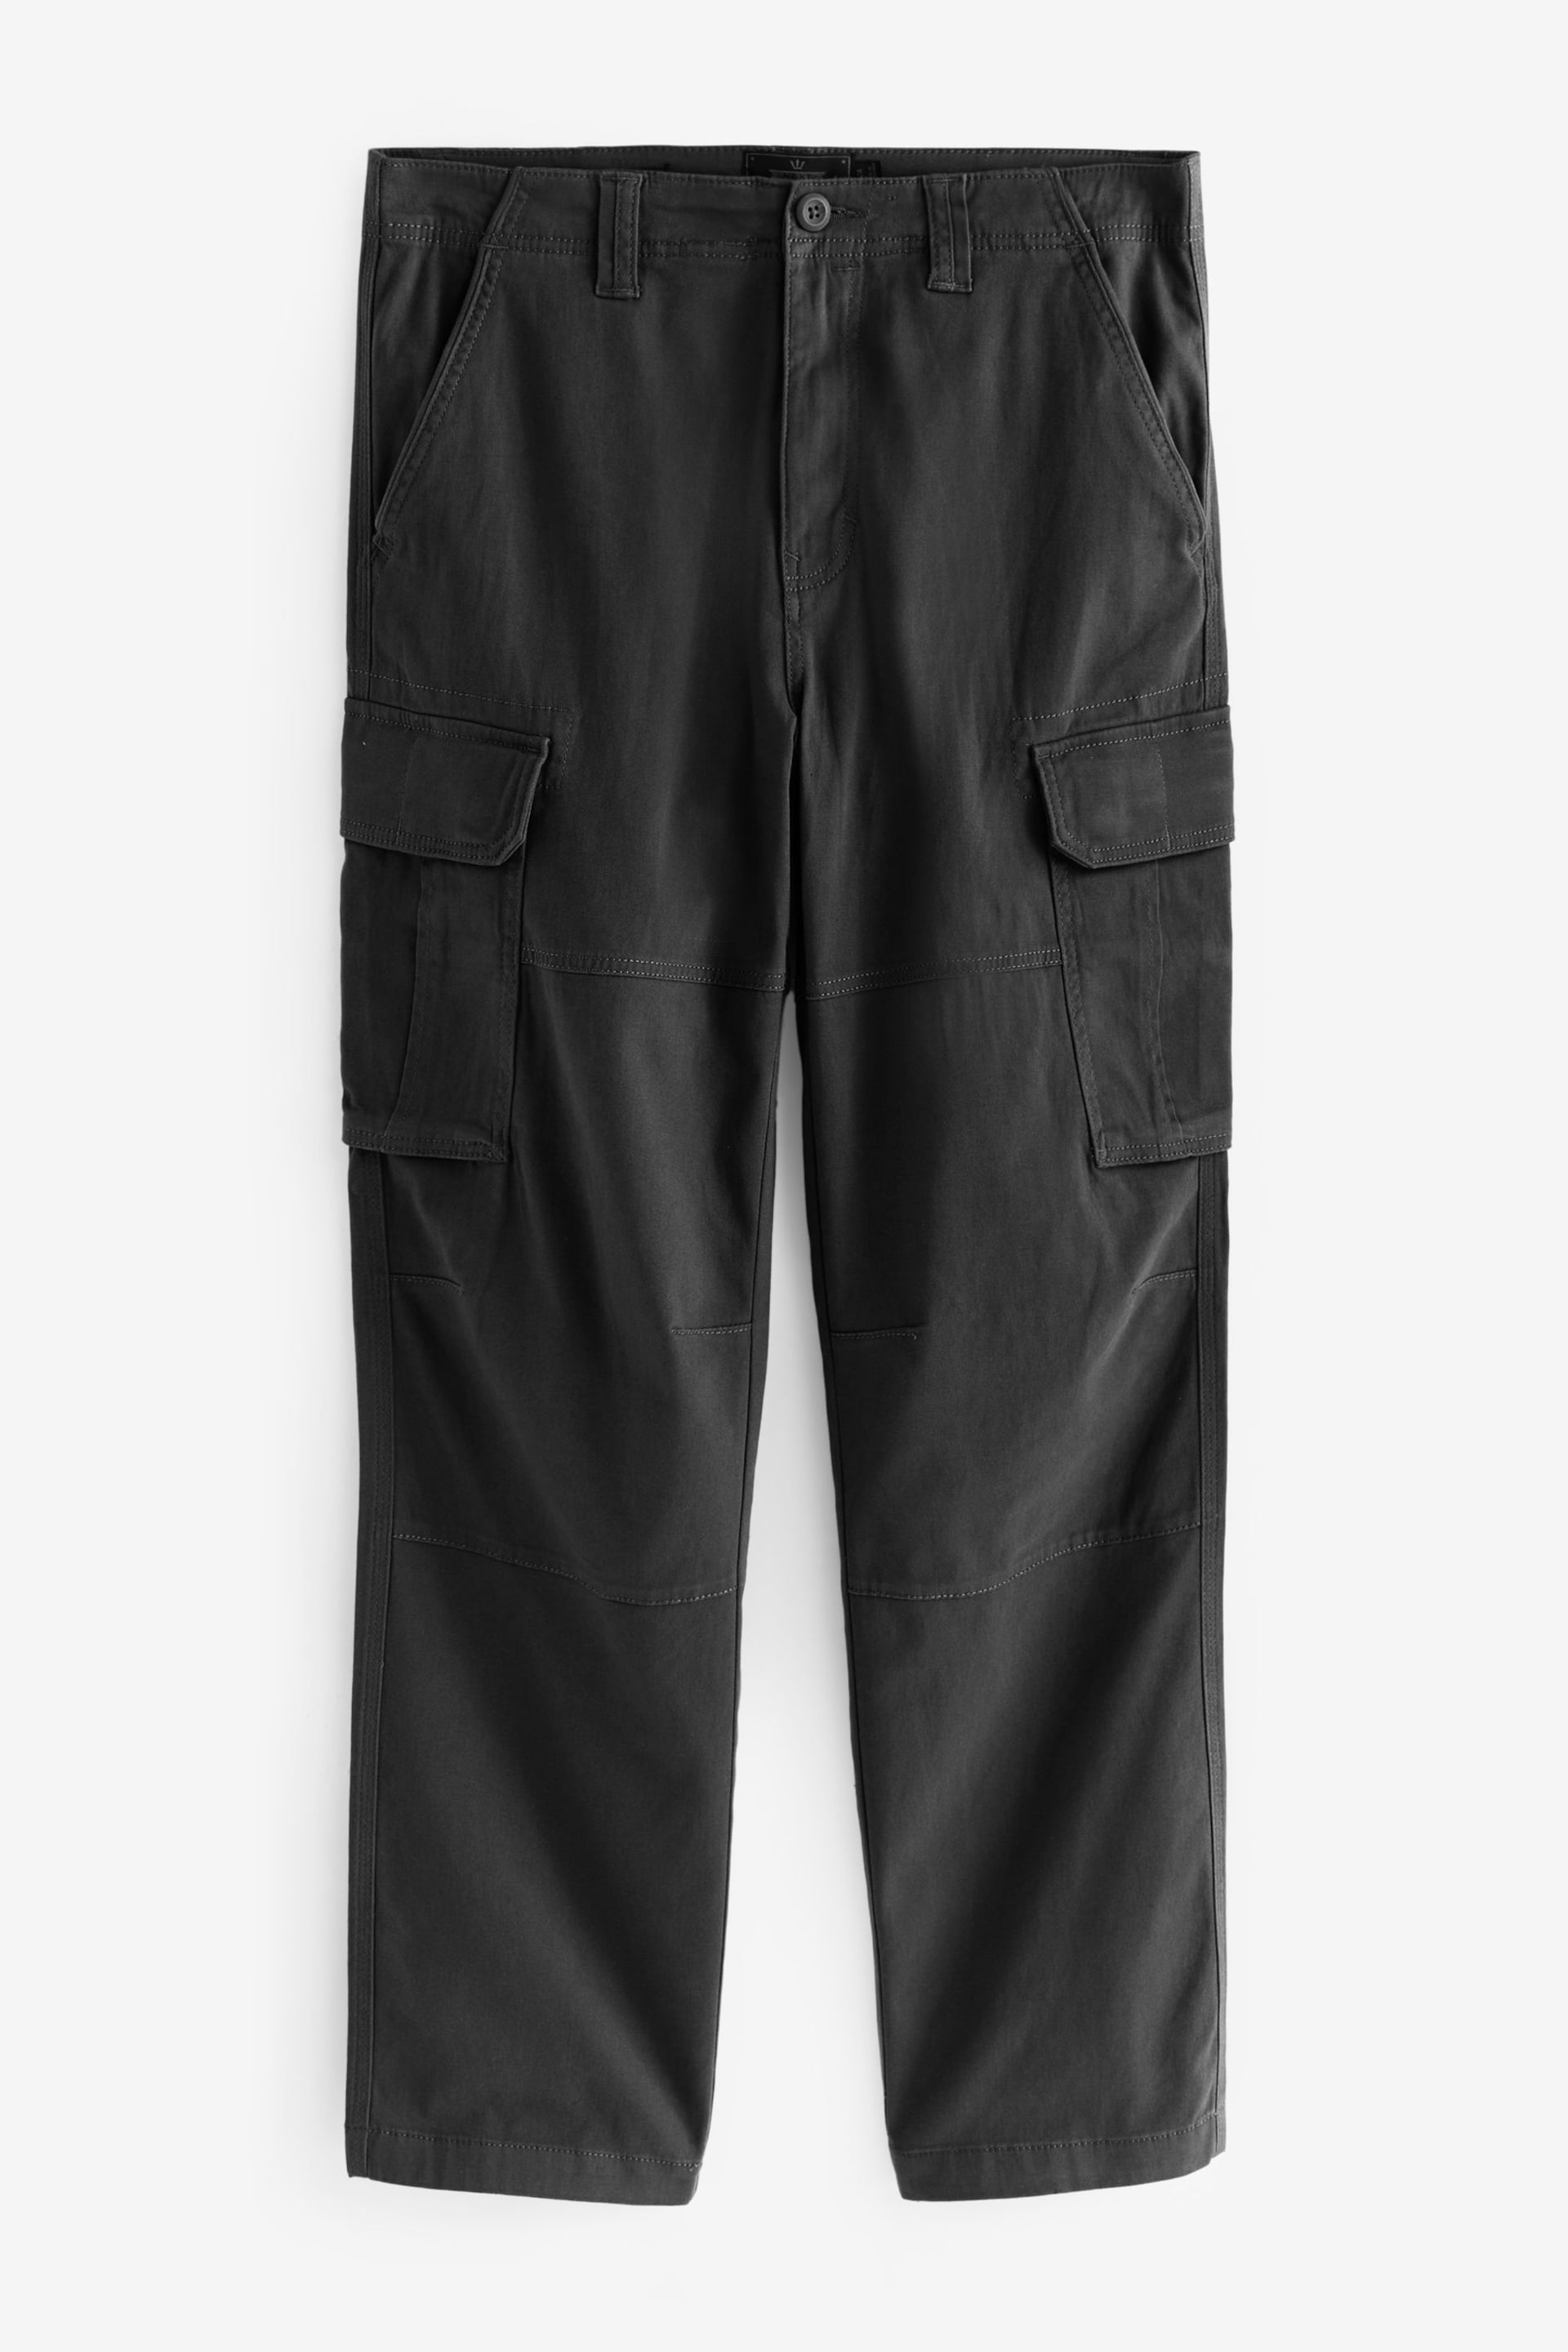 Black/Charcoal Grey Straight Cotton Rich Stretch Cargo Trousers 2 Pack - Image 7 of 13